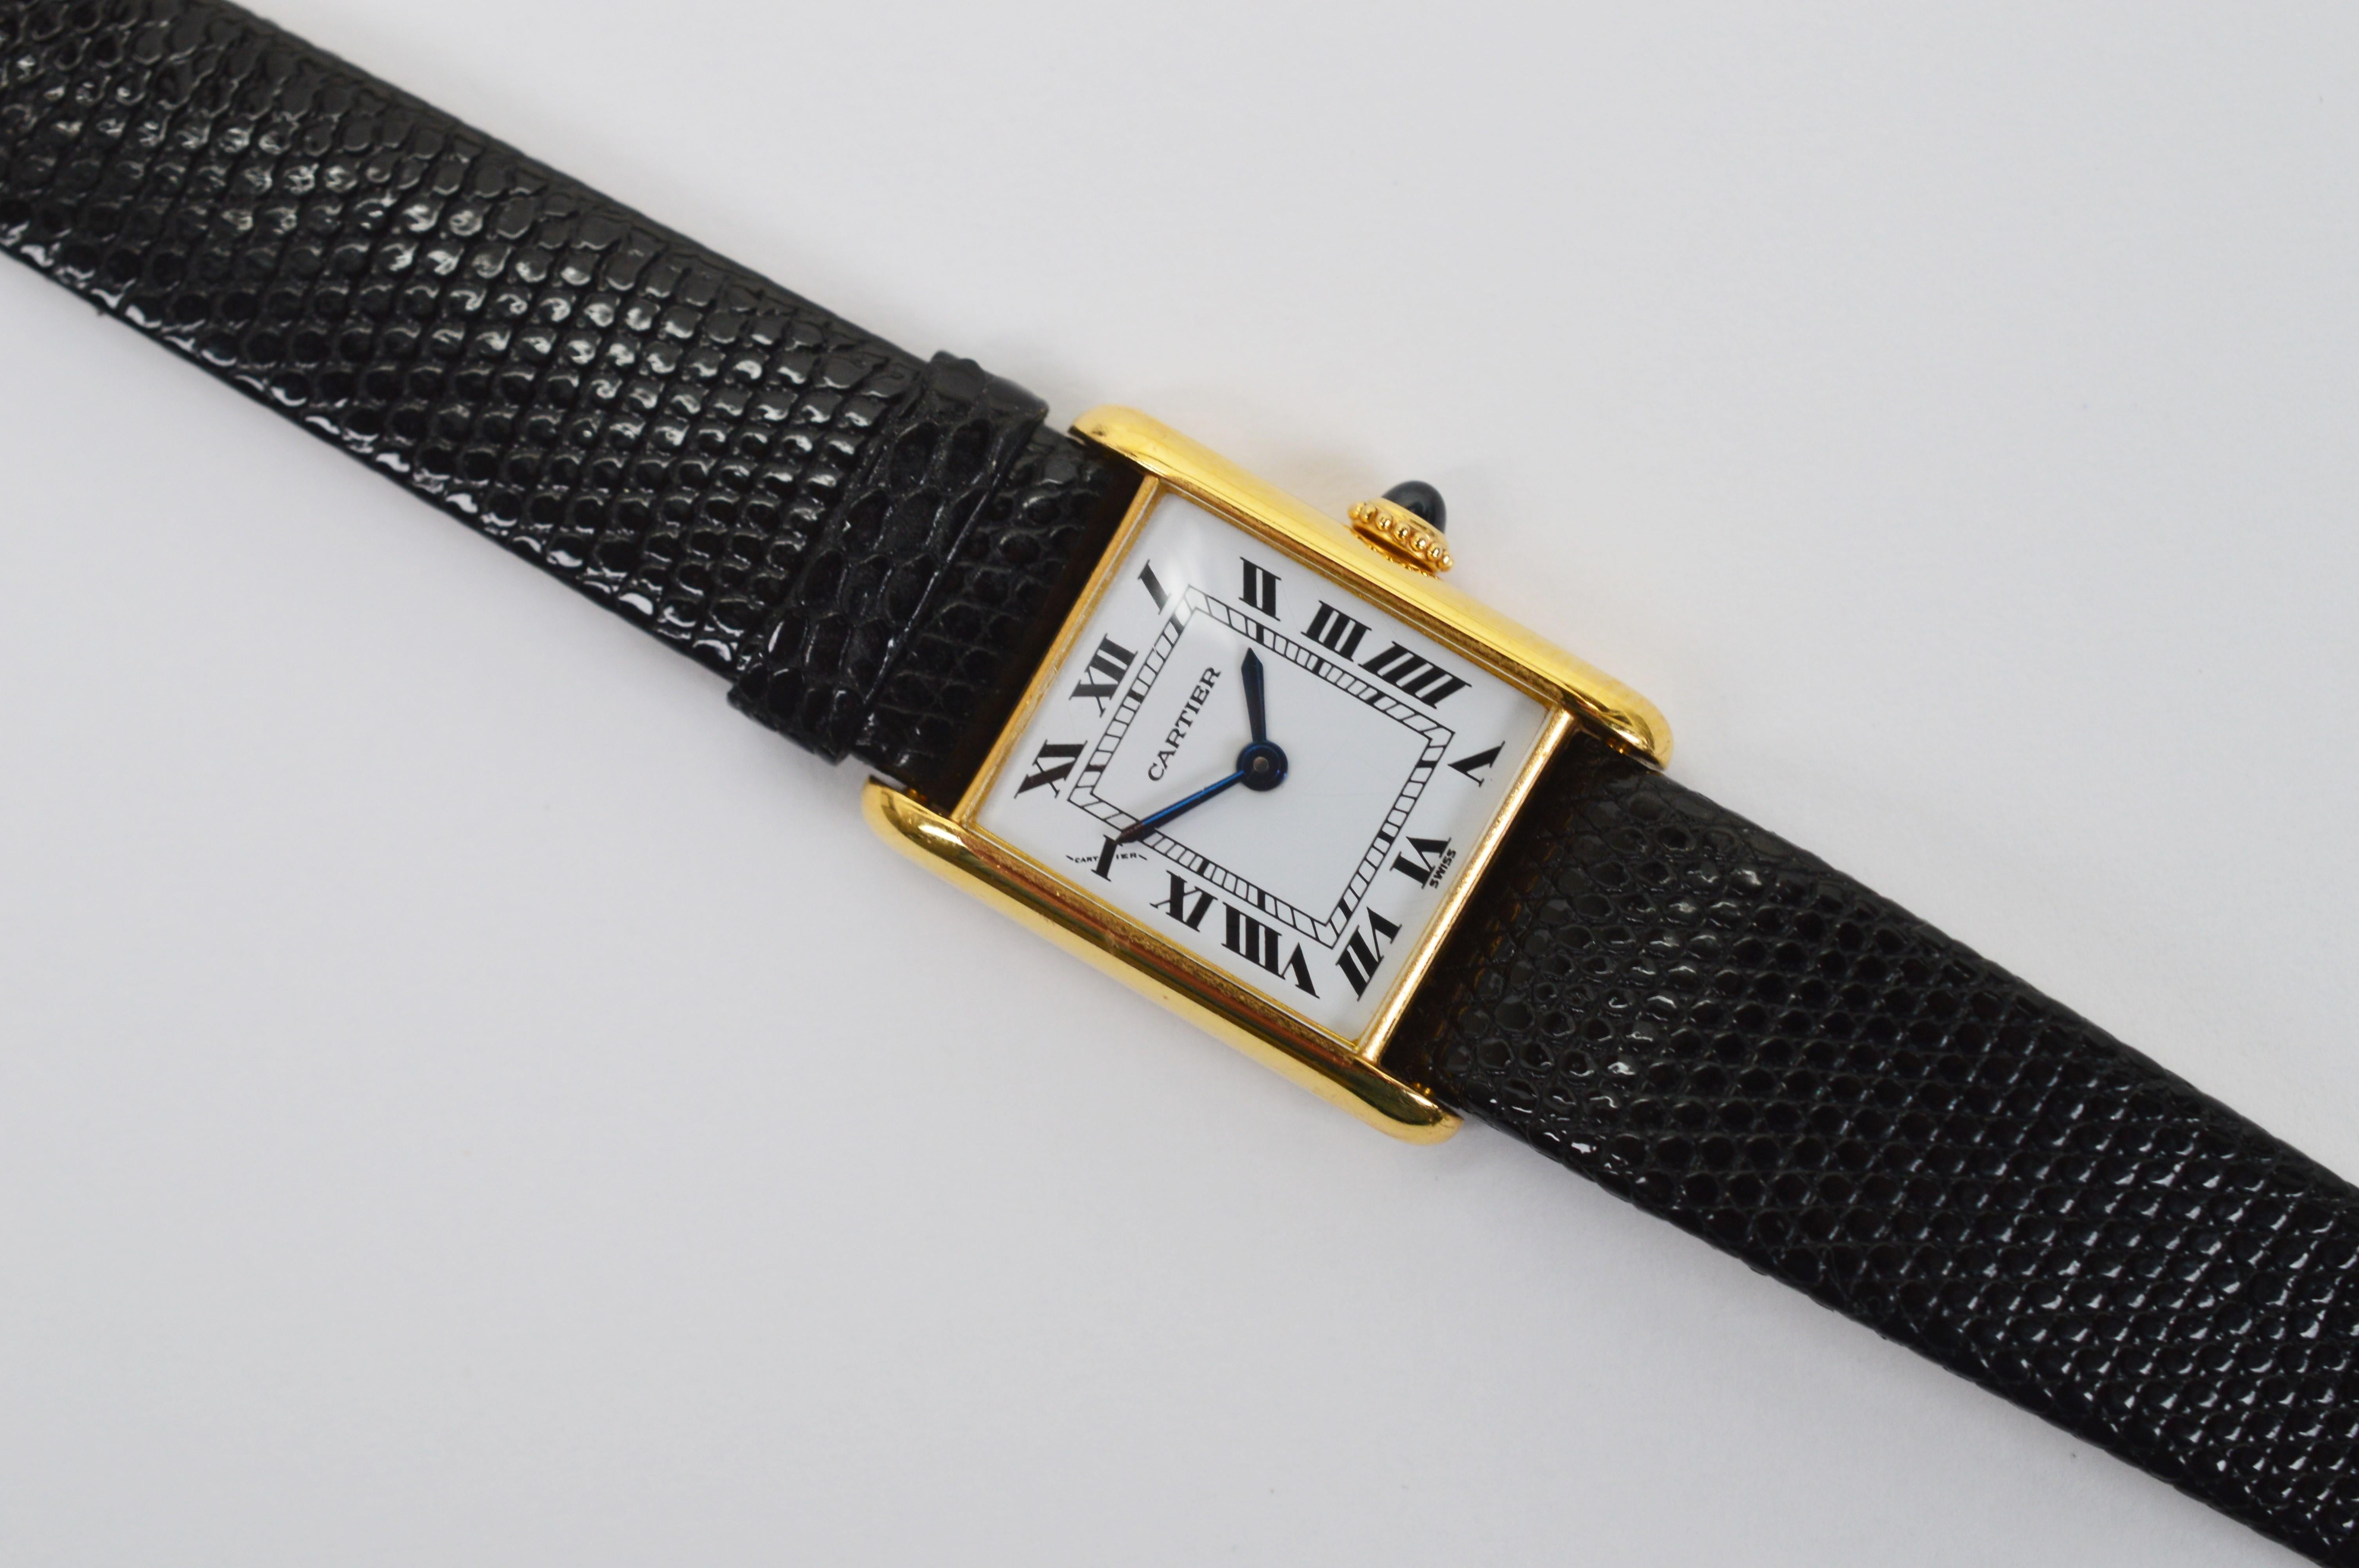 Circa 1960's, this sophisticated yet functional Ladies watch style by Cartier was all the rage and is still relevant today. The slender lines of the Cartier tank and design created by its maker over 100 years ago, continue to make this model a